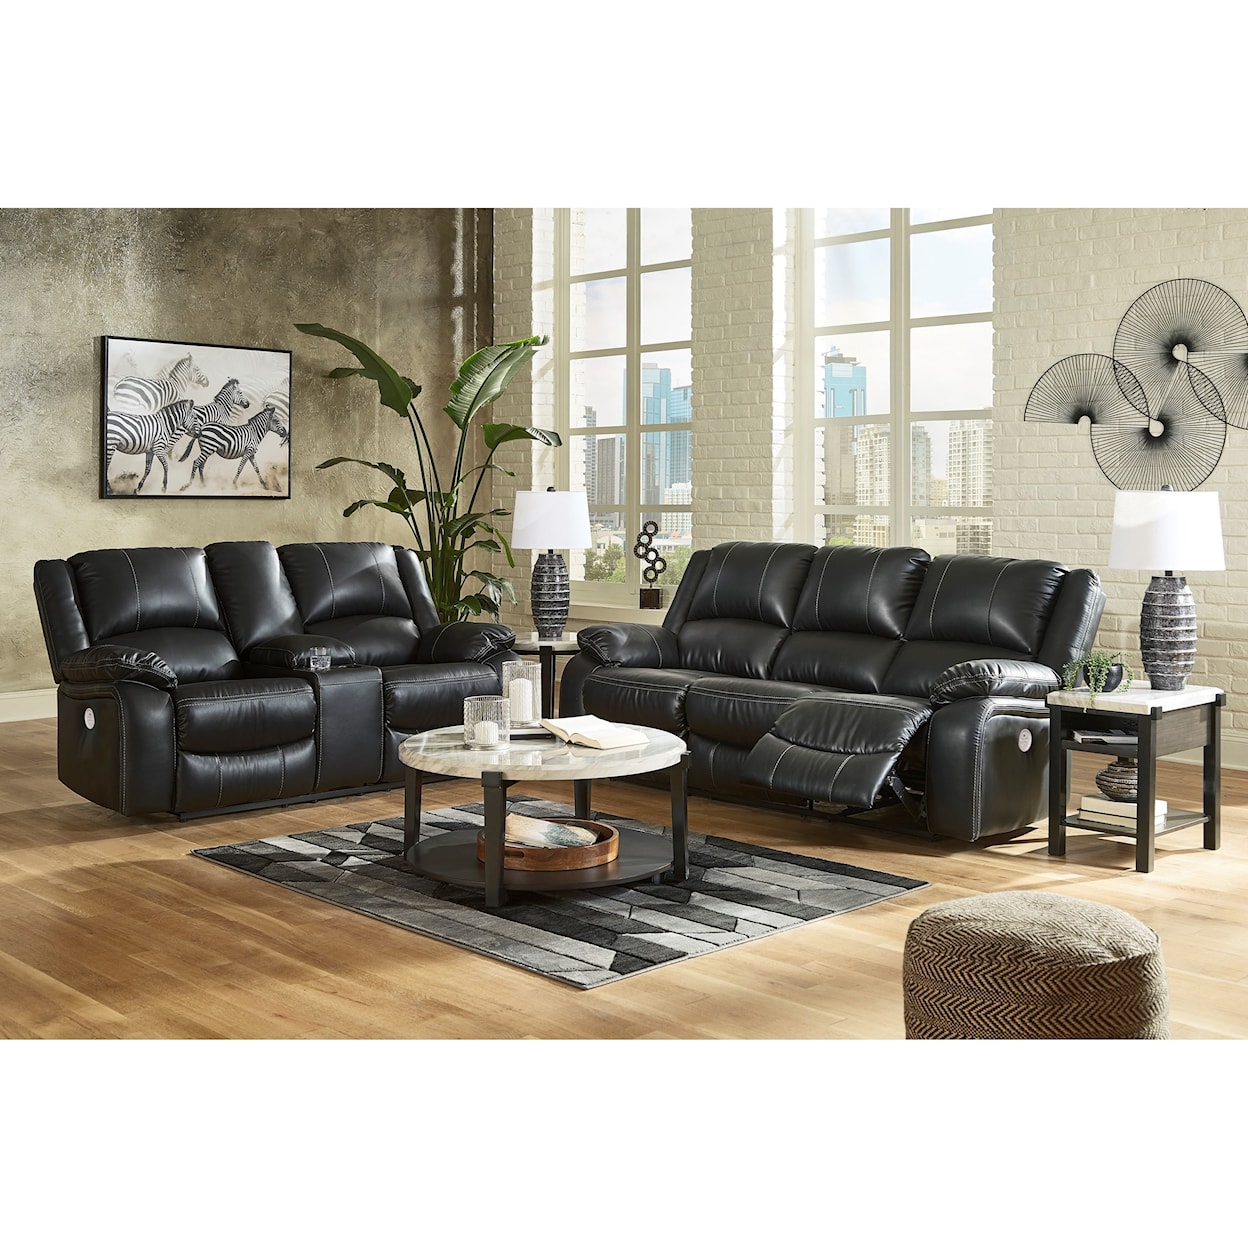 Signature Design by Ashley Calderwell Double Reclining Power Loveseat w/ Console